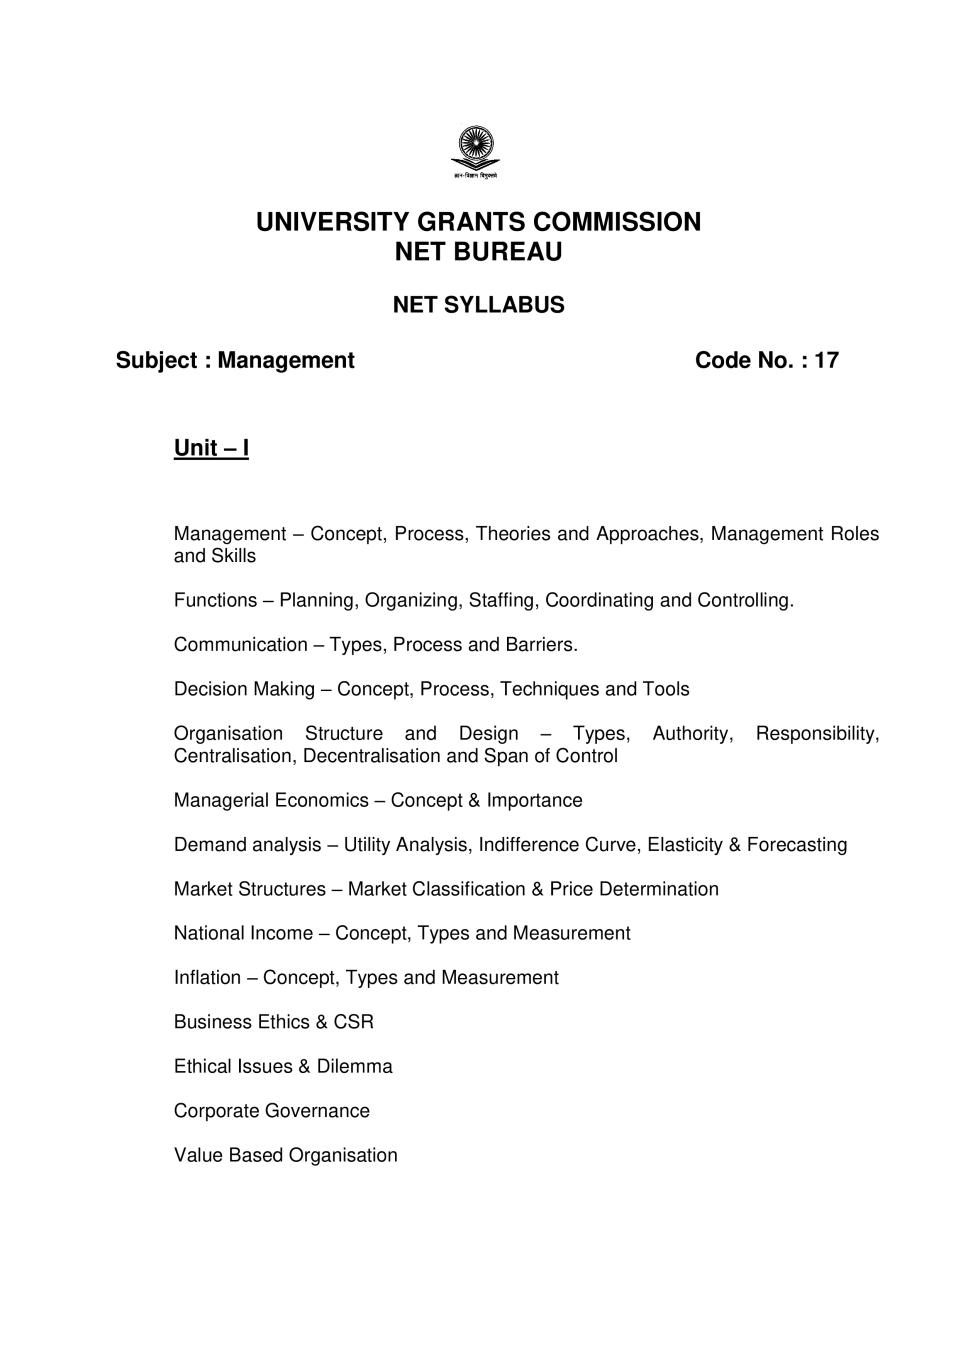 UGC NET Syllabus for Management 2020 - Page 1